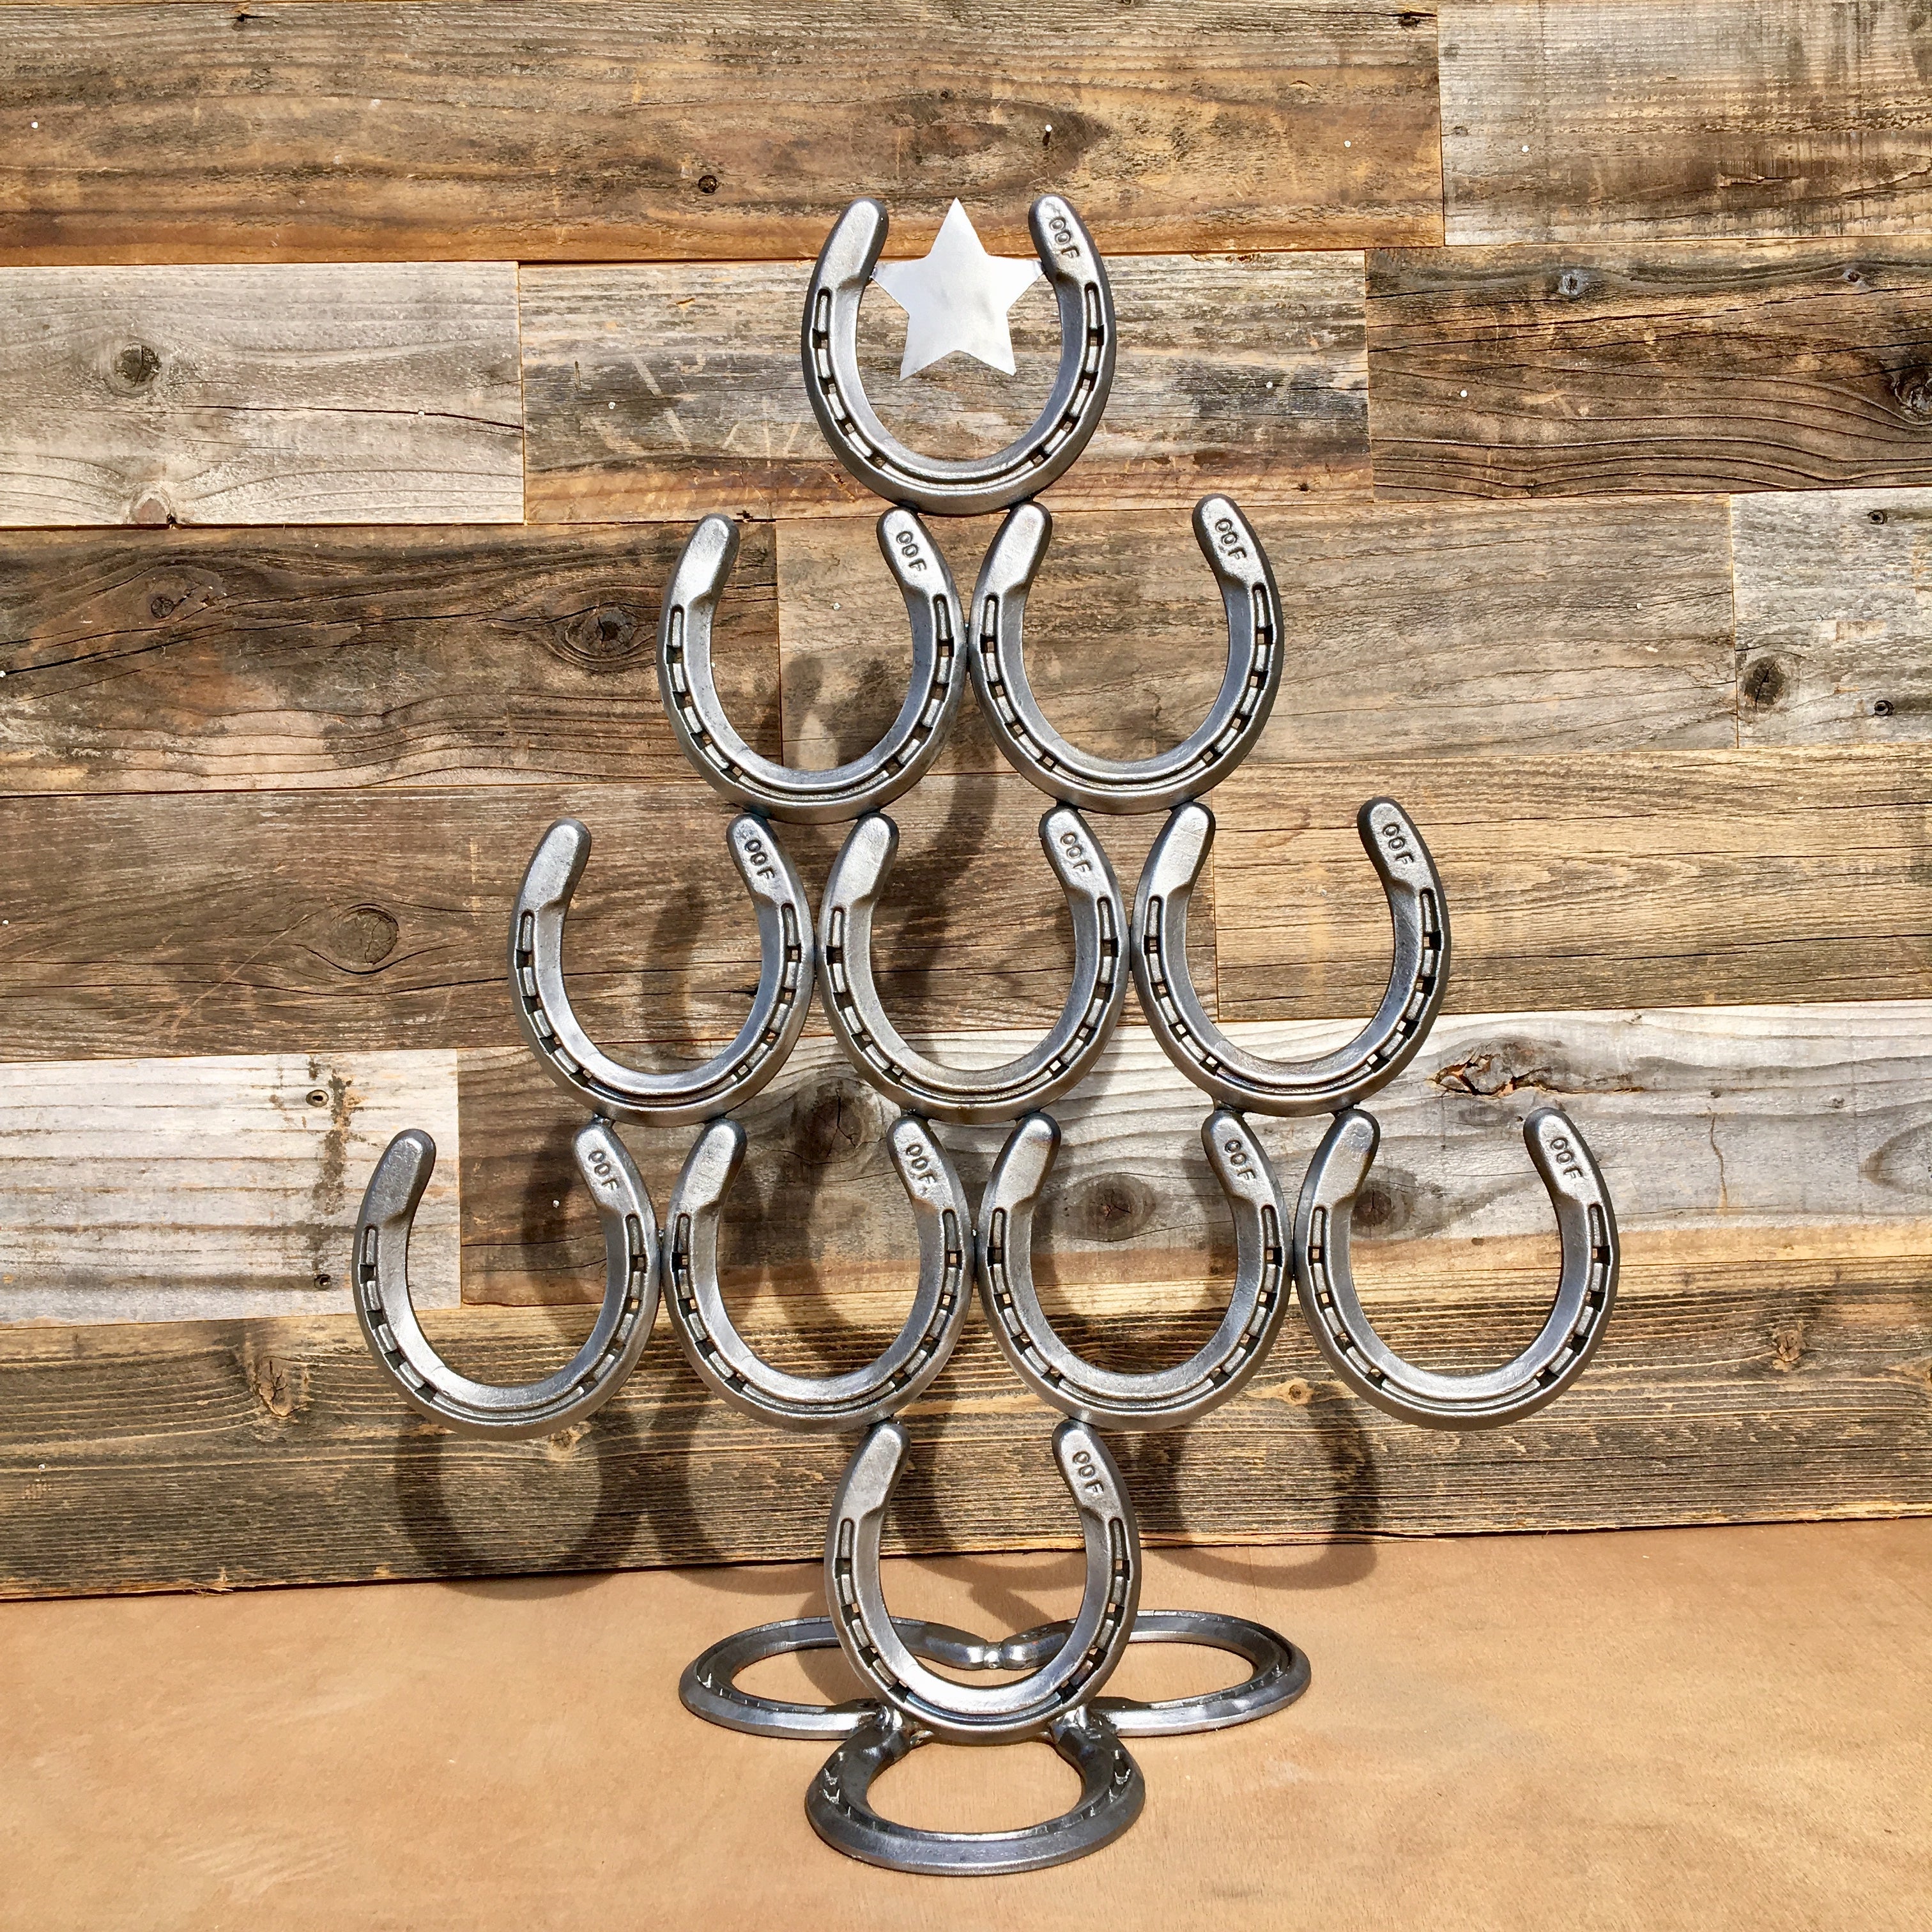 Rustic Horseshoe Christmas Tree with Star and Ornaments - Catch the lu